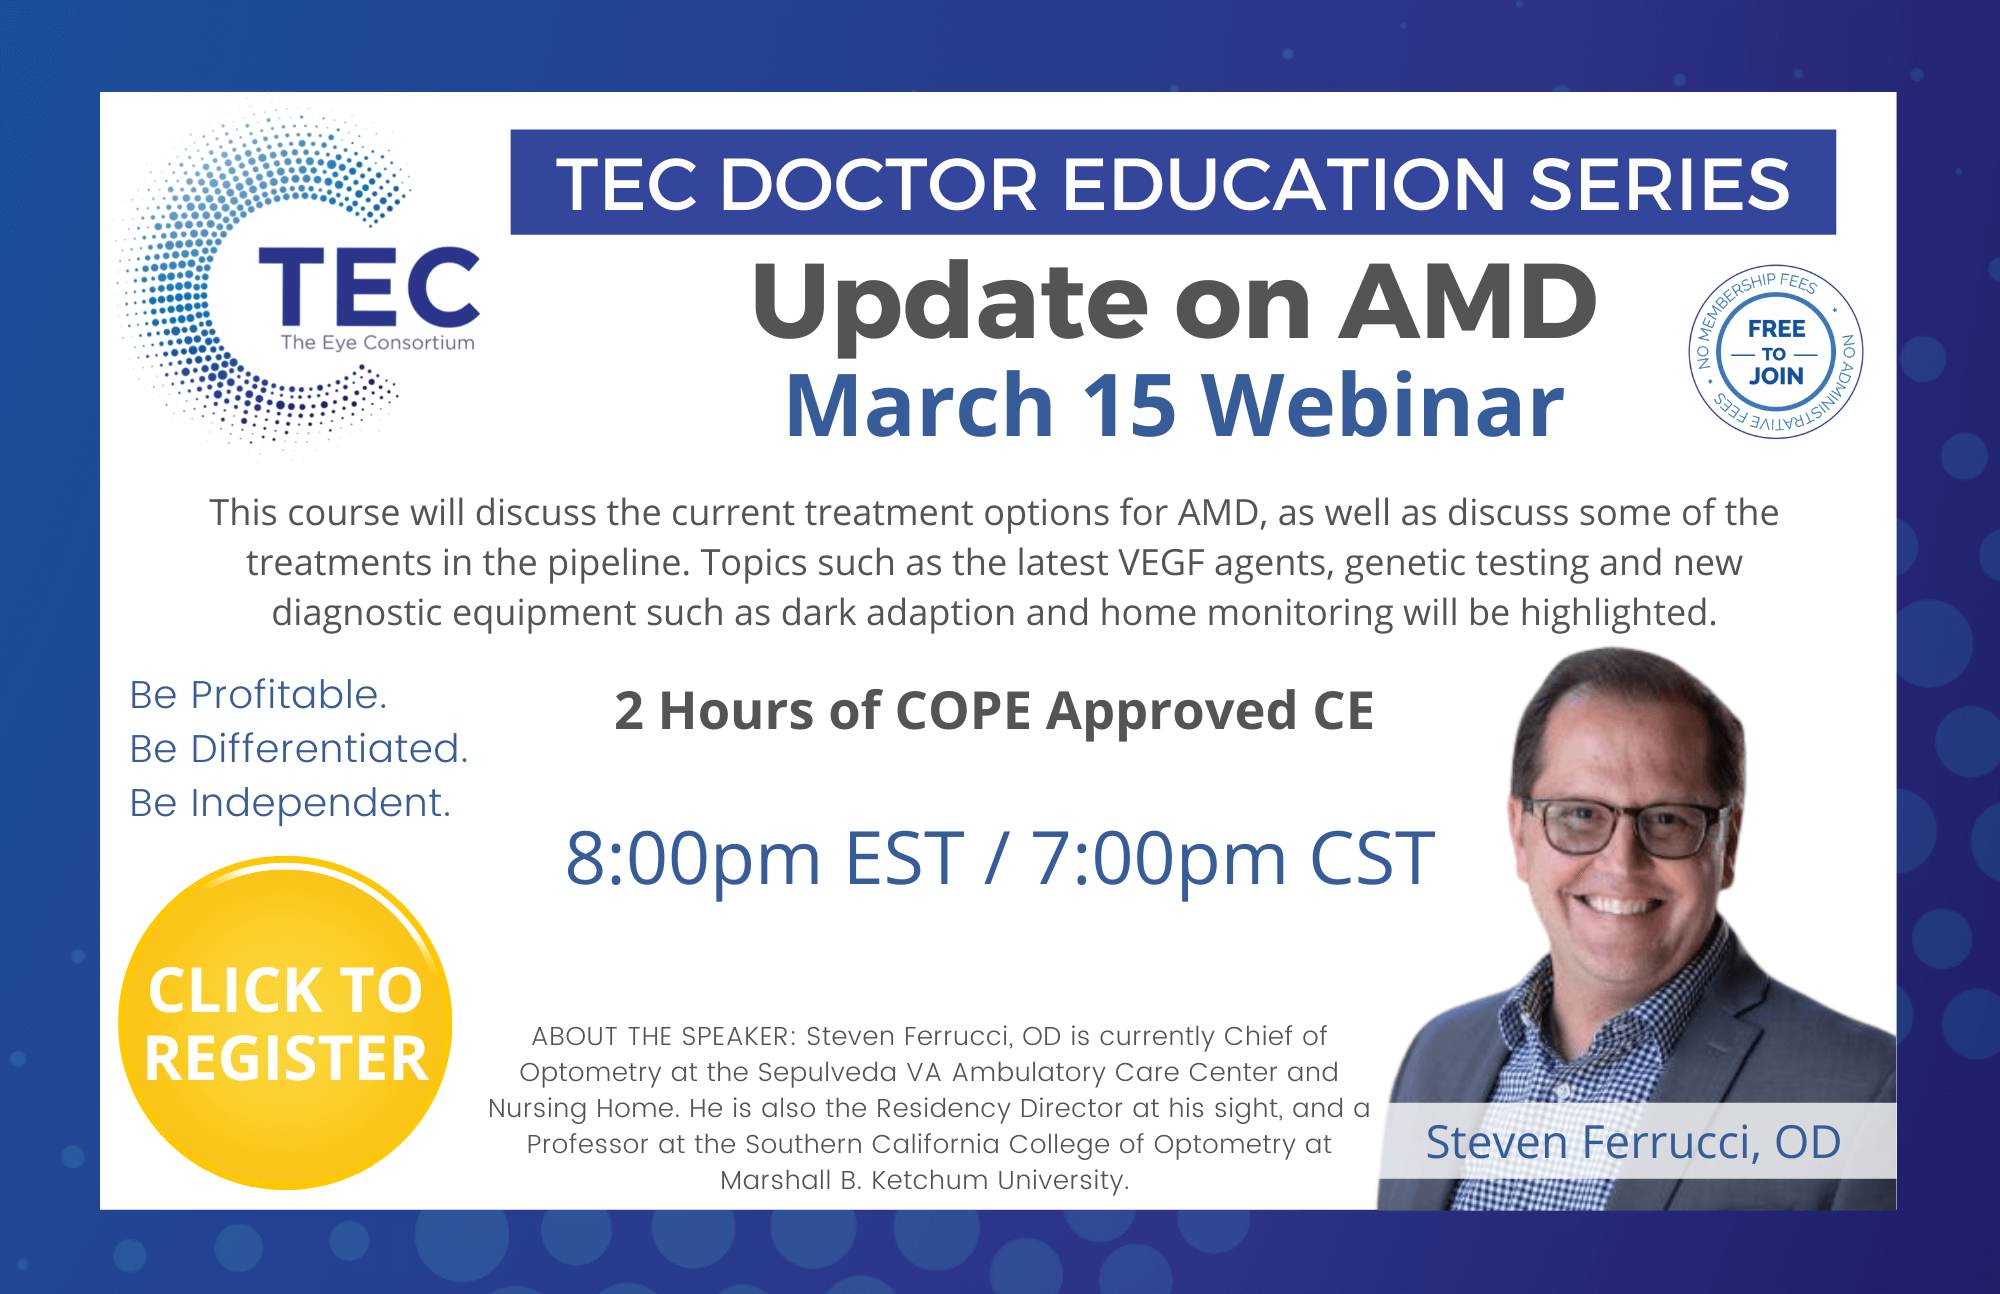 TEC Education Series - Update on AMD Webinar with Steven Ferrucci, OD on March 15th at 8pm EST/7pm CST